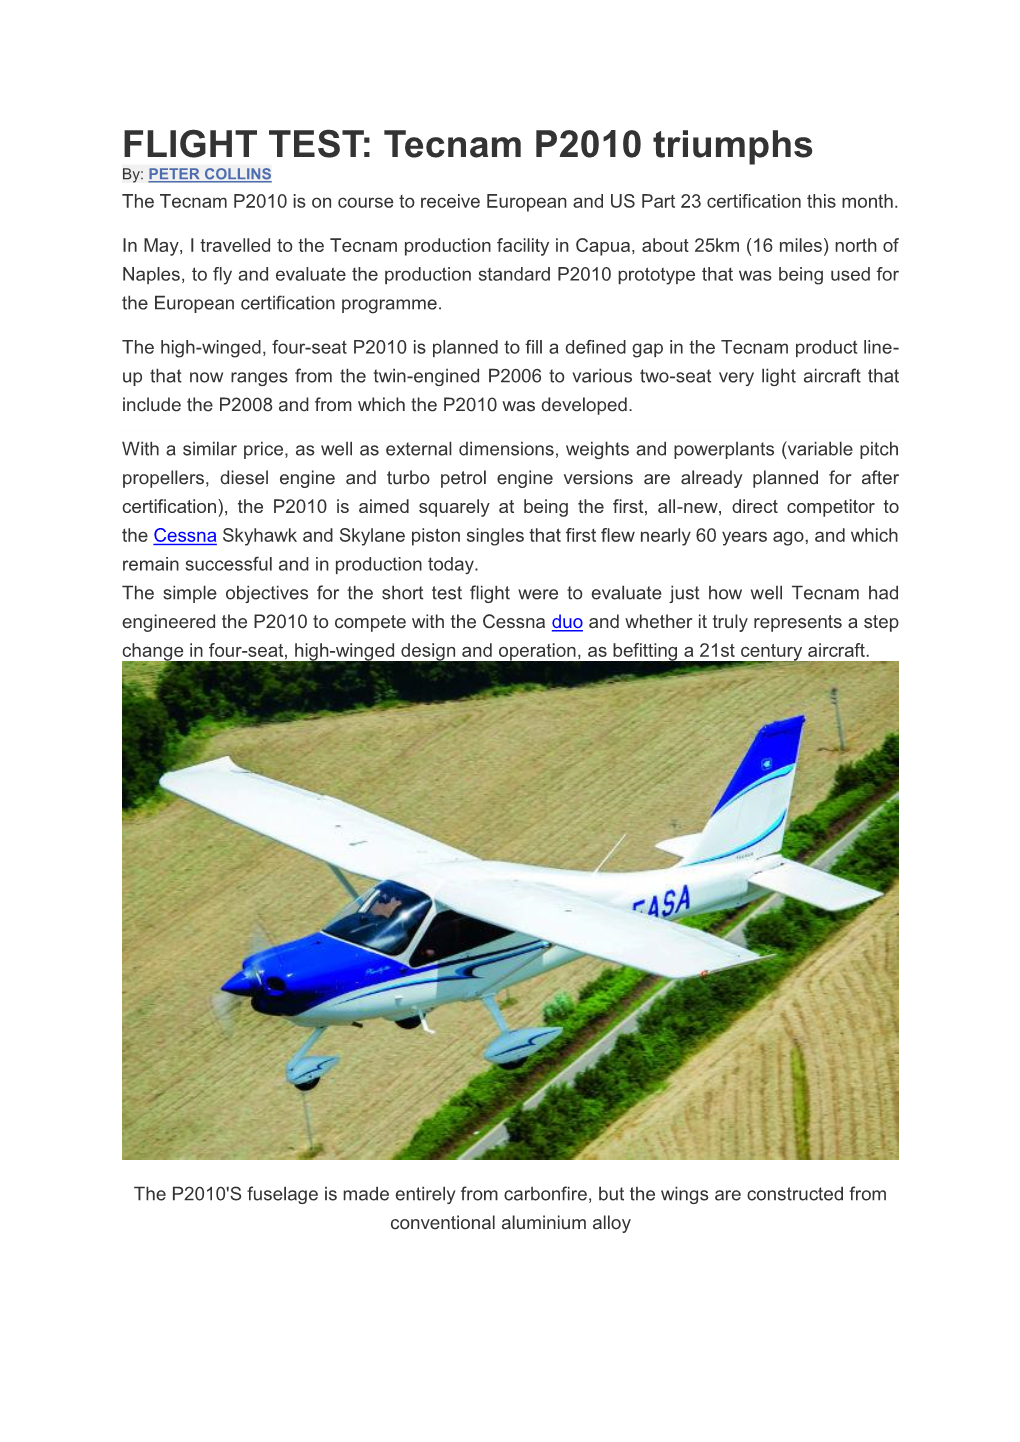 FLIGHT TEST: Tecnam P2010 Triumphs By: PETER COLLINS the Tecnam P2010 Is on Course to Receive European and US Part 23 Certification This Month